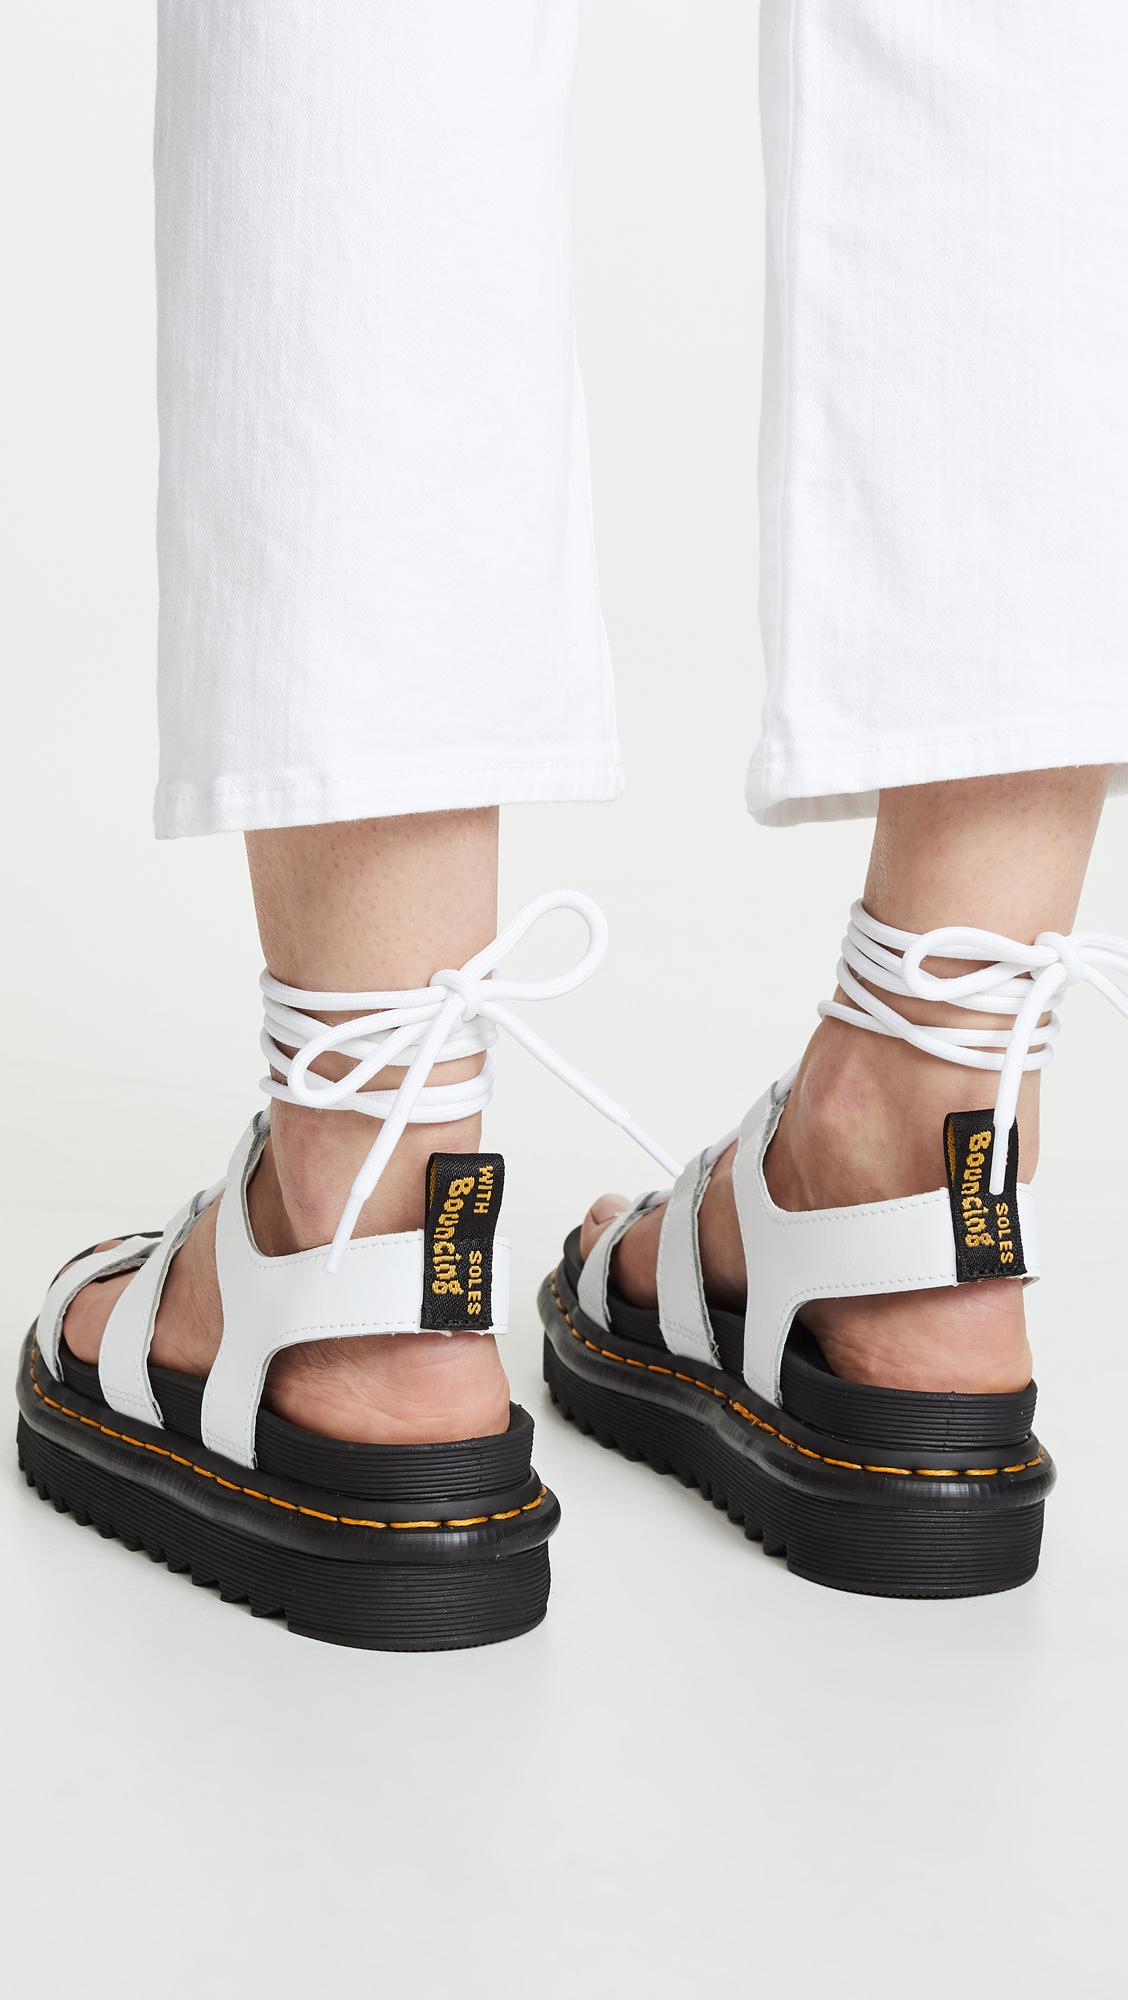 Dr Womens Flats and flat shoes Dr Martens Leather Nartilla White Sandal in Black Martens Flats and flat shoes 